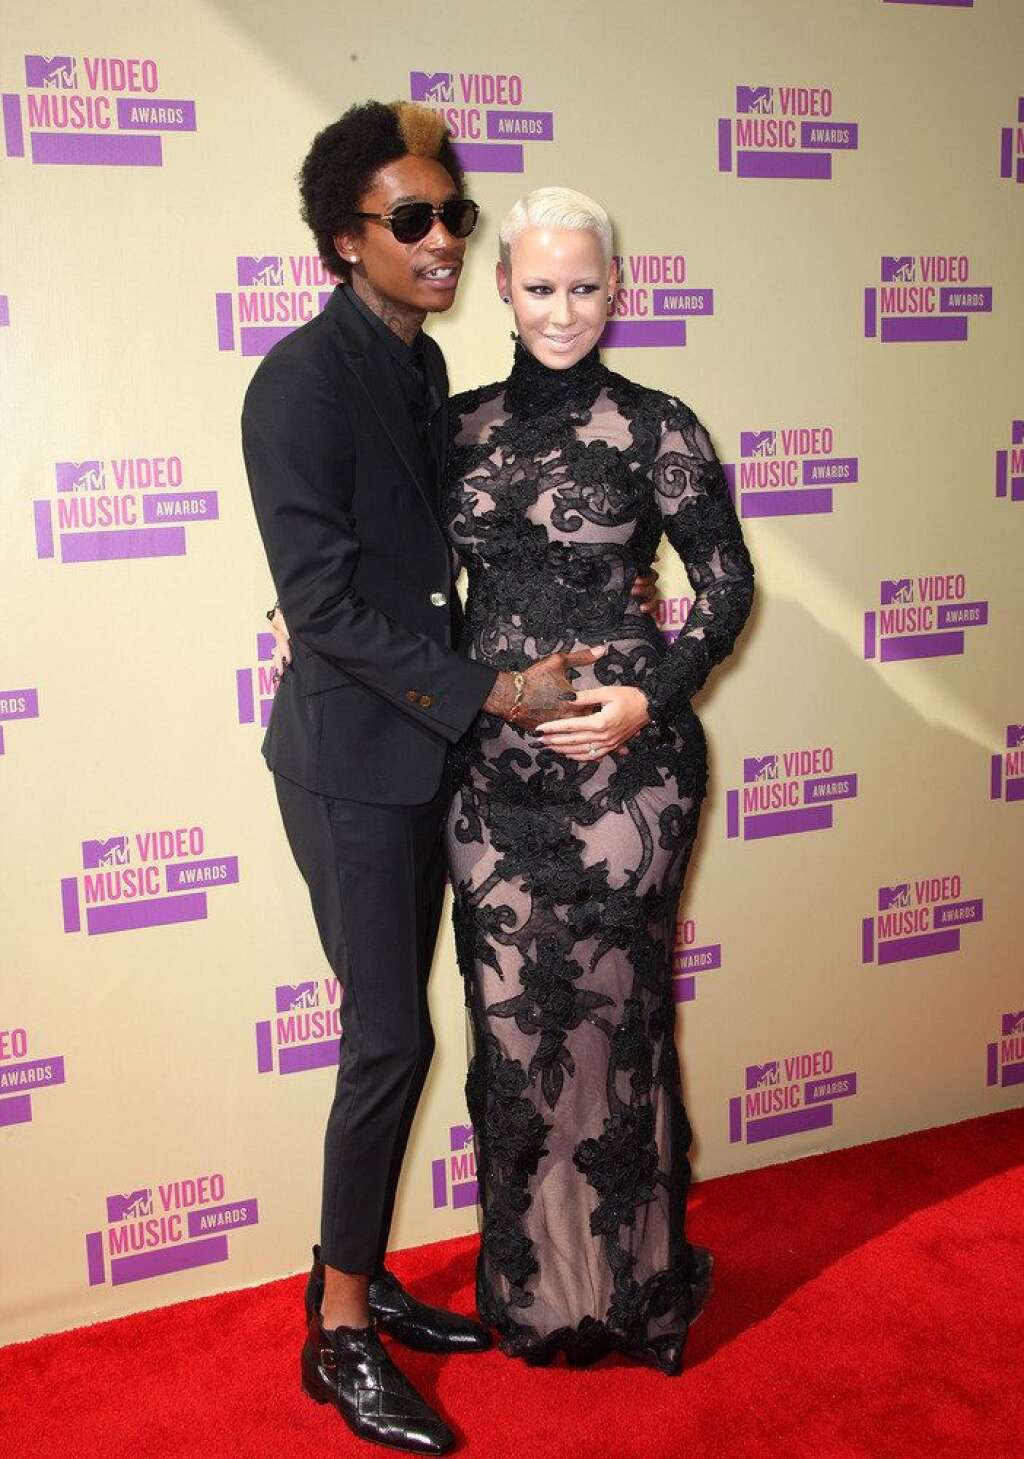 2012 MTV Video Music Awards - Arrivals - LOS ANGELES, CA - SEPTEMBER 06:  (L-R) Rapper Wiz Khalifa and model Amber Rose arrive at the 2012 MTV Video Music Awards at Staples Center on September 6, 2012 in Los Angeles, California.  (Photo by Frederick M. Brown/Getty Images)